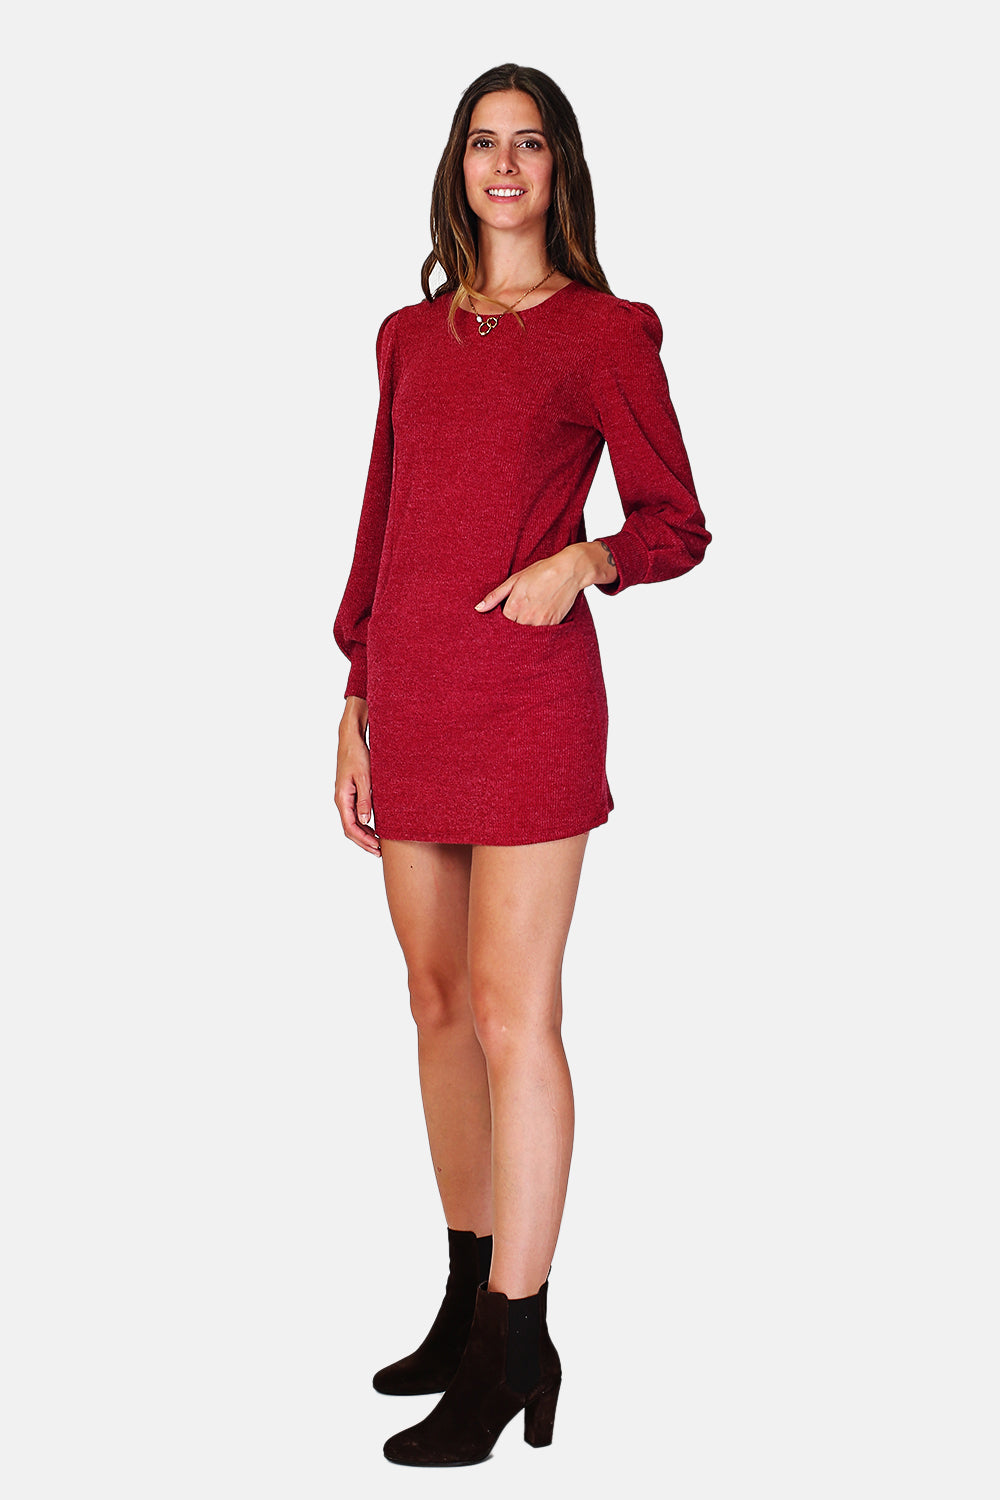 Long sleeve crew neck dress with pockets